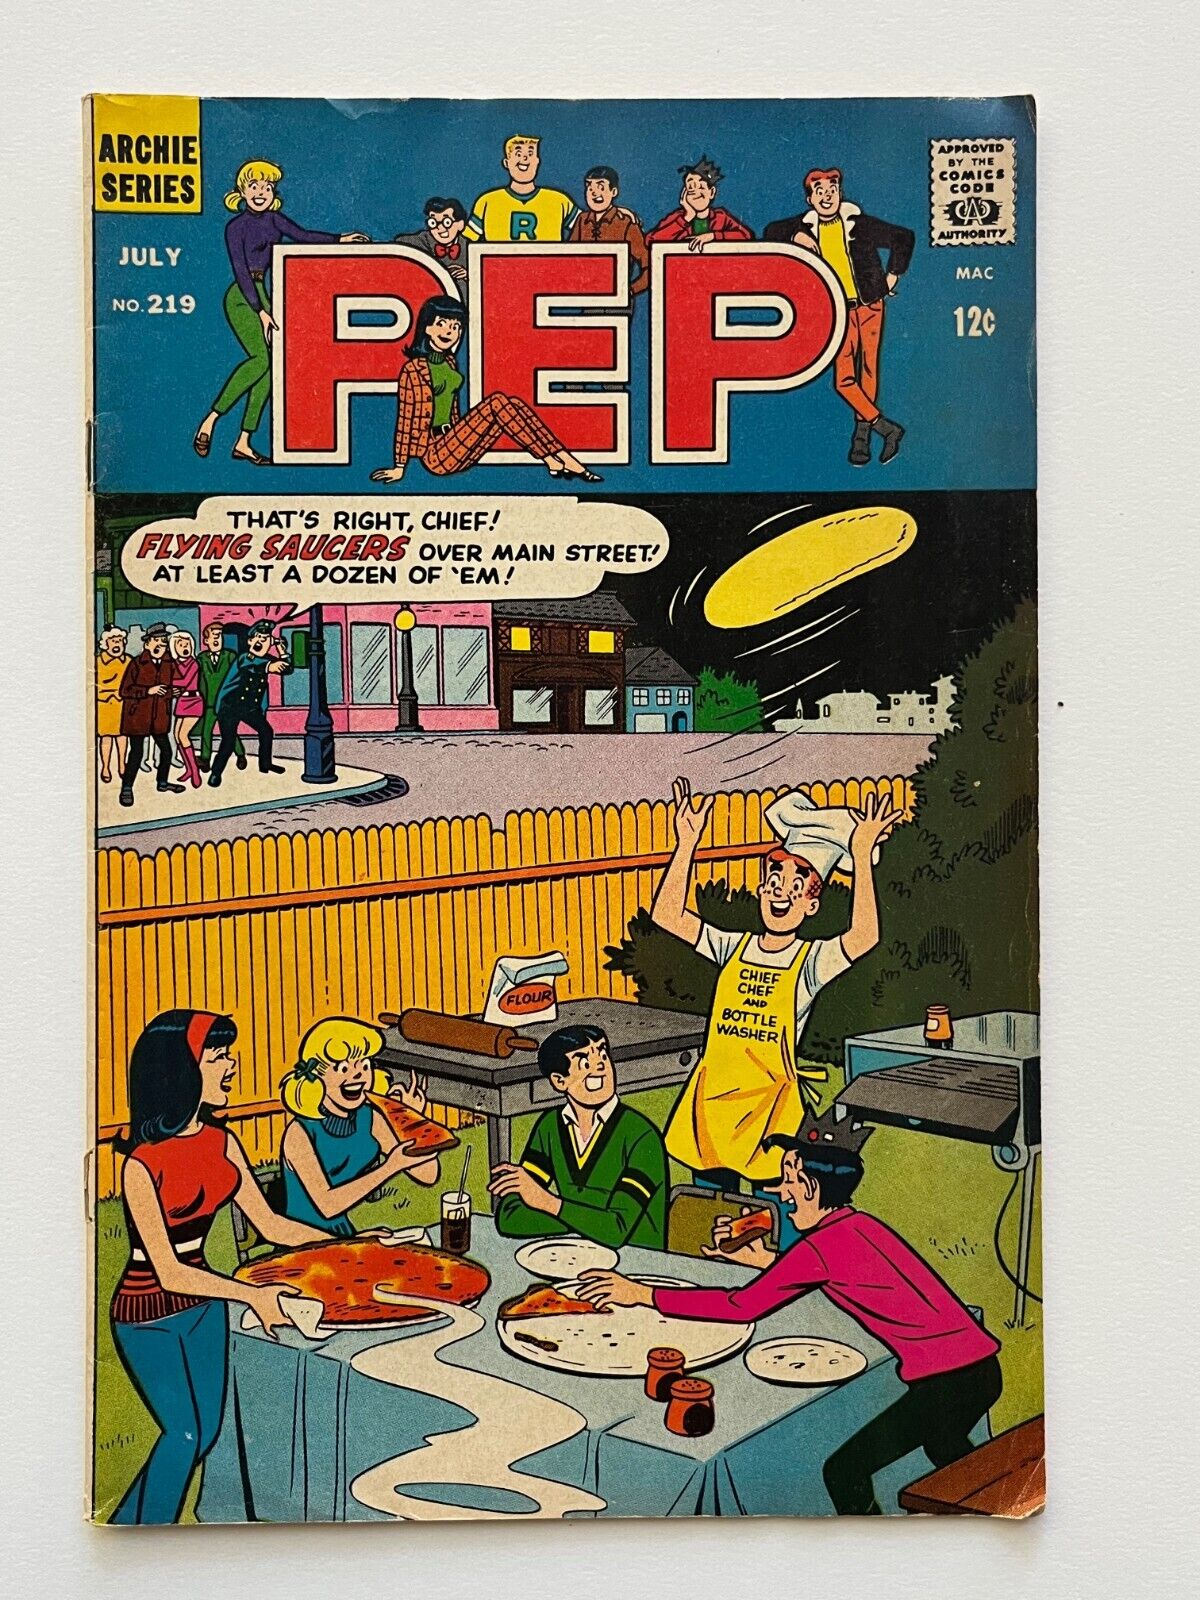 Pep #219 (1968) Archie Comics bottom cover staple and bottom CF staple detached